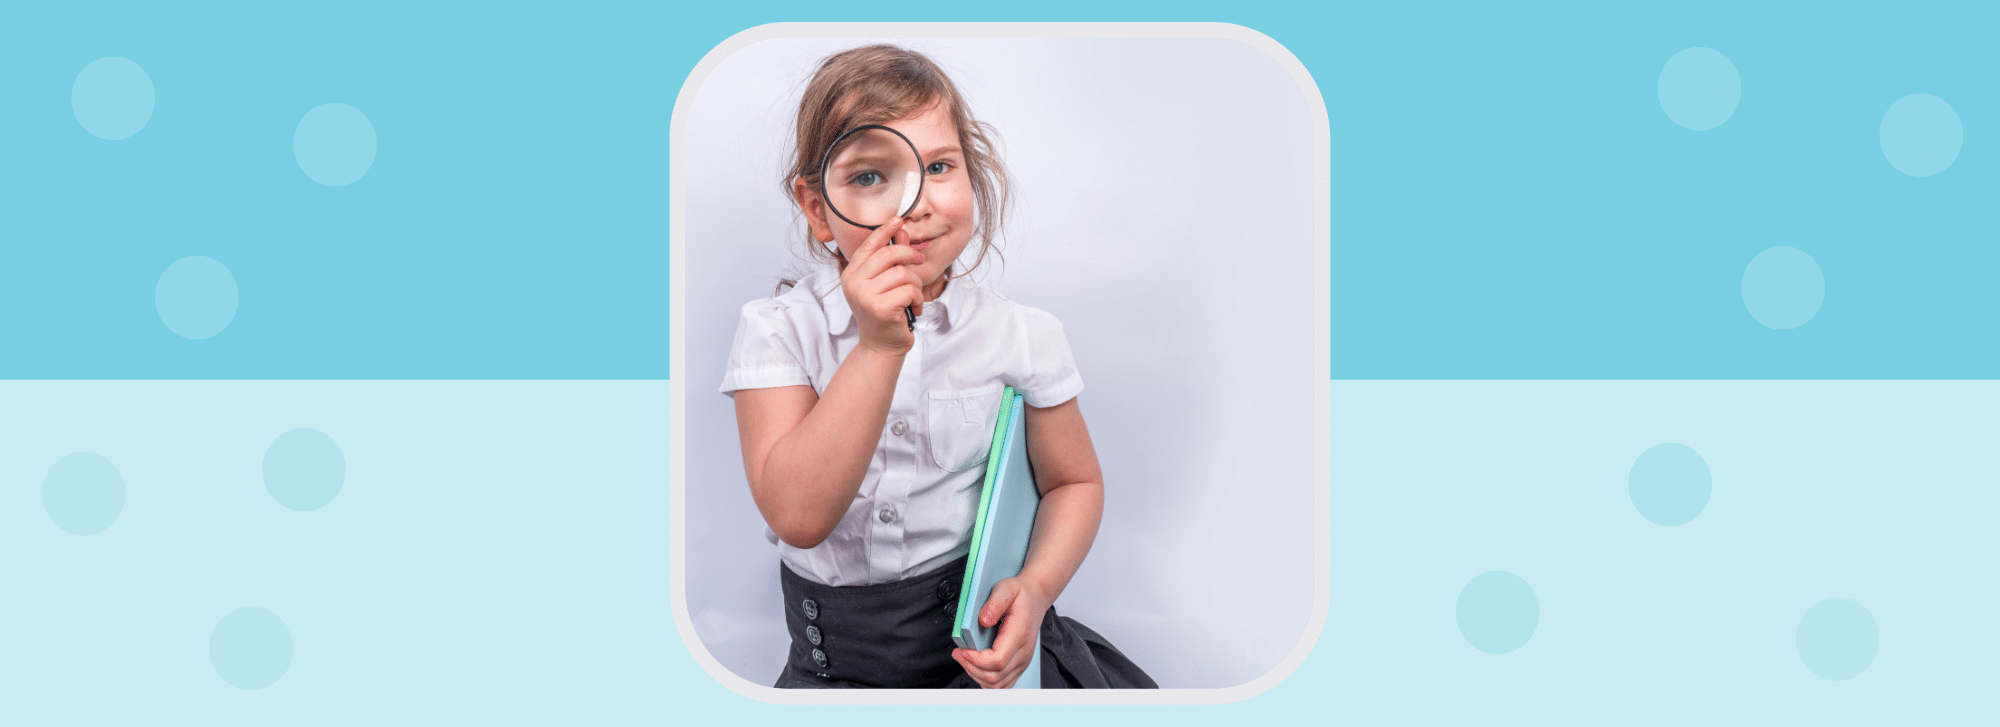 image showing a little girl holding a magnifying glass and a book